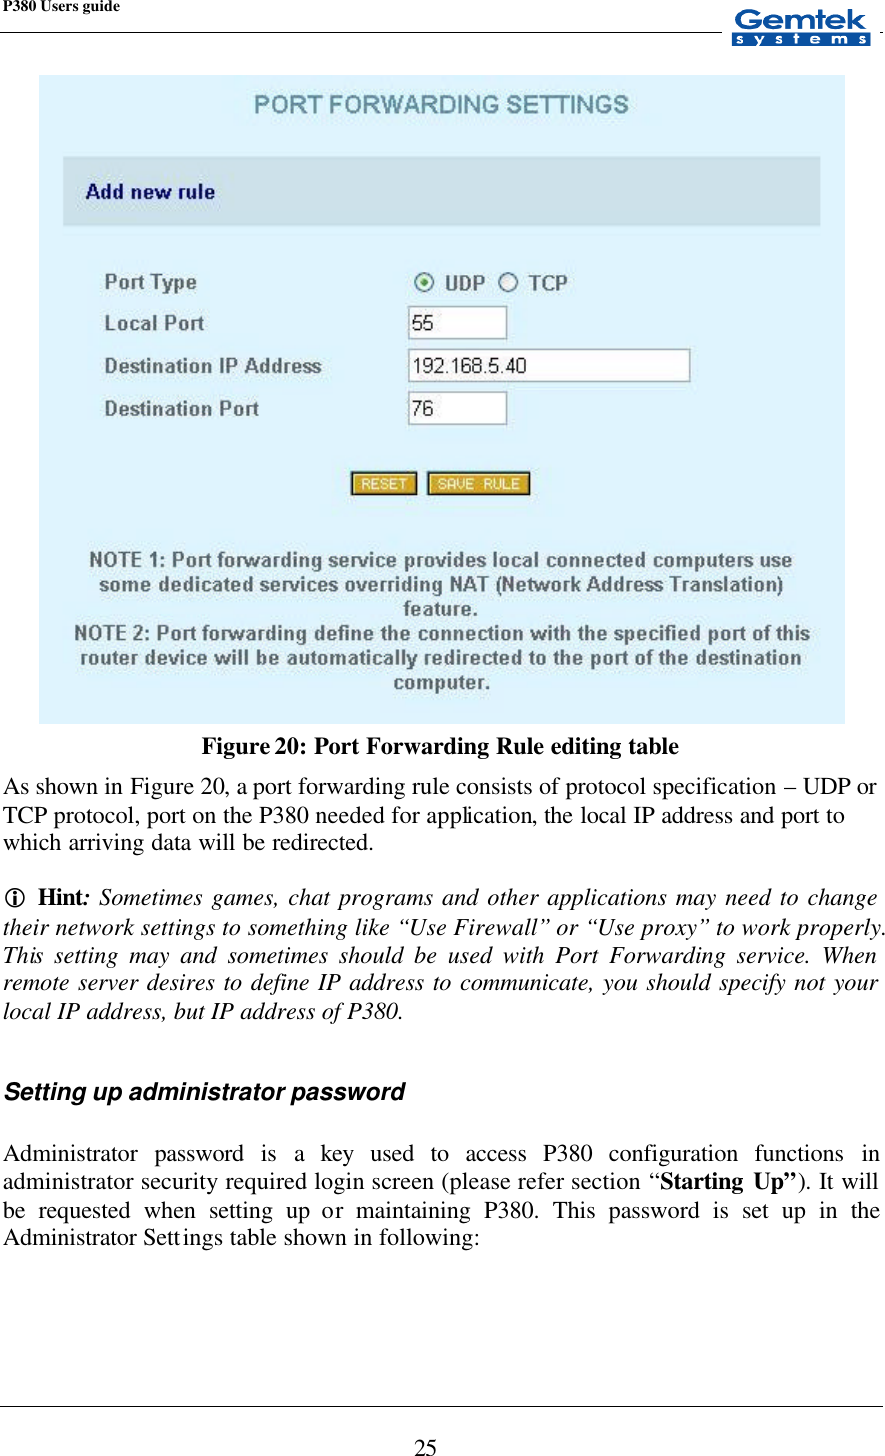 P380 Users guide            25  Figure 20: Port Forwarding Rule editing table As shown in Figure 20, a port forwarding rule consists of protocol specification – UDP or TCP protocol, port on the P380 needed for application, the  local IP address and port to which arriving data will be redirected.  i Hint: Sometimes games, chat programs and other applications may need to change their network settings to something like “Use Firewall” or “Use proxy” to work properly. This setting may and sometimes should be used with Port Forwarding service. When remote server desires to define IP address to communicate, you should specify not your local IP address, but IP address of P380.  Setting up administrator password  Administrator password is a key used to access P380 configuration functions in administrator security required login screen (please refer section “Starting Up”). It will be requested when setting up or maintaining P380. This password is set up in the Administrator Settings table shown in following:   